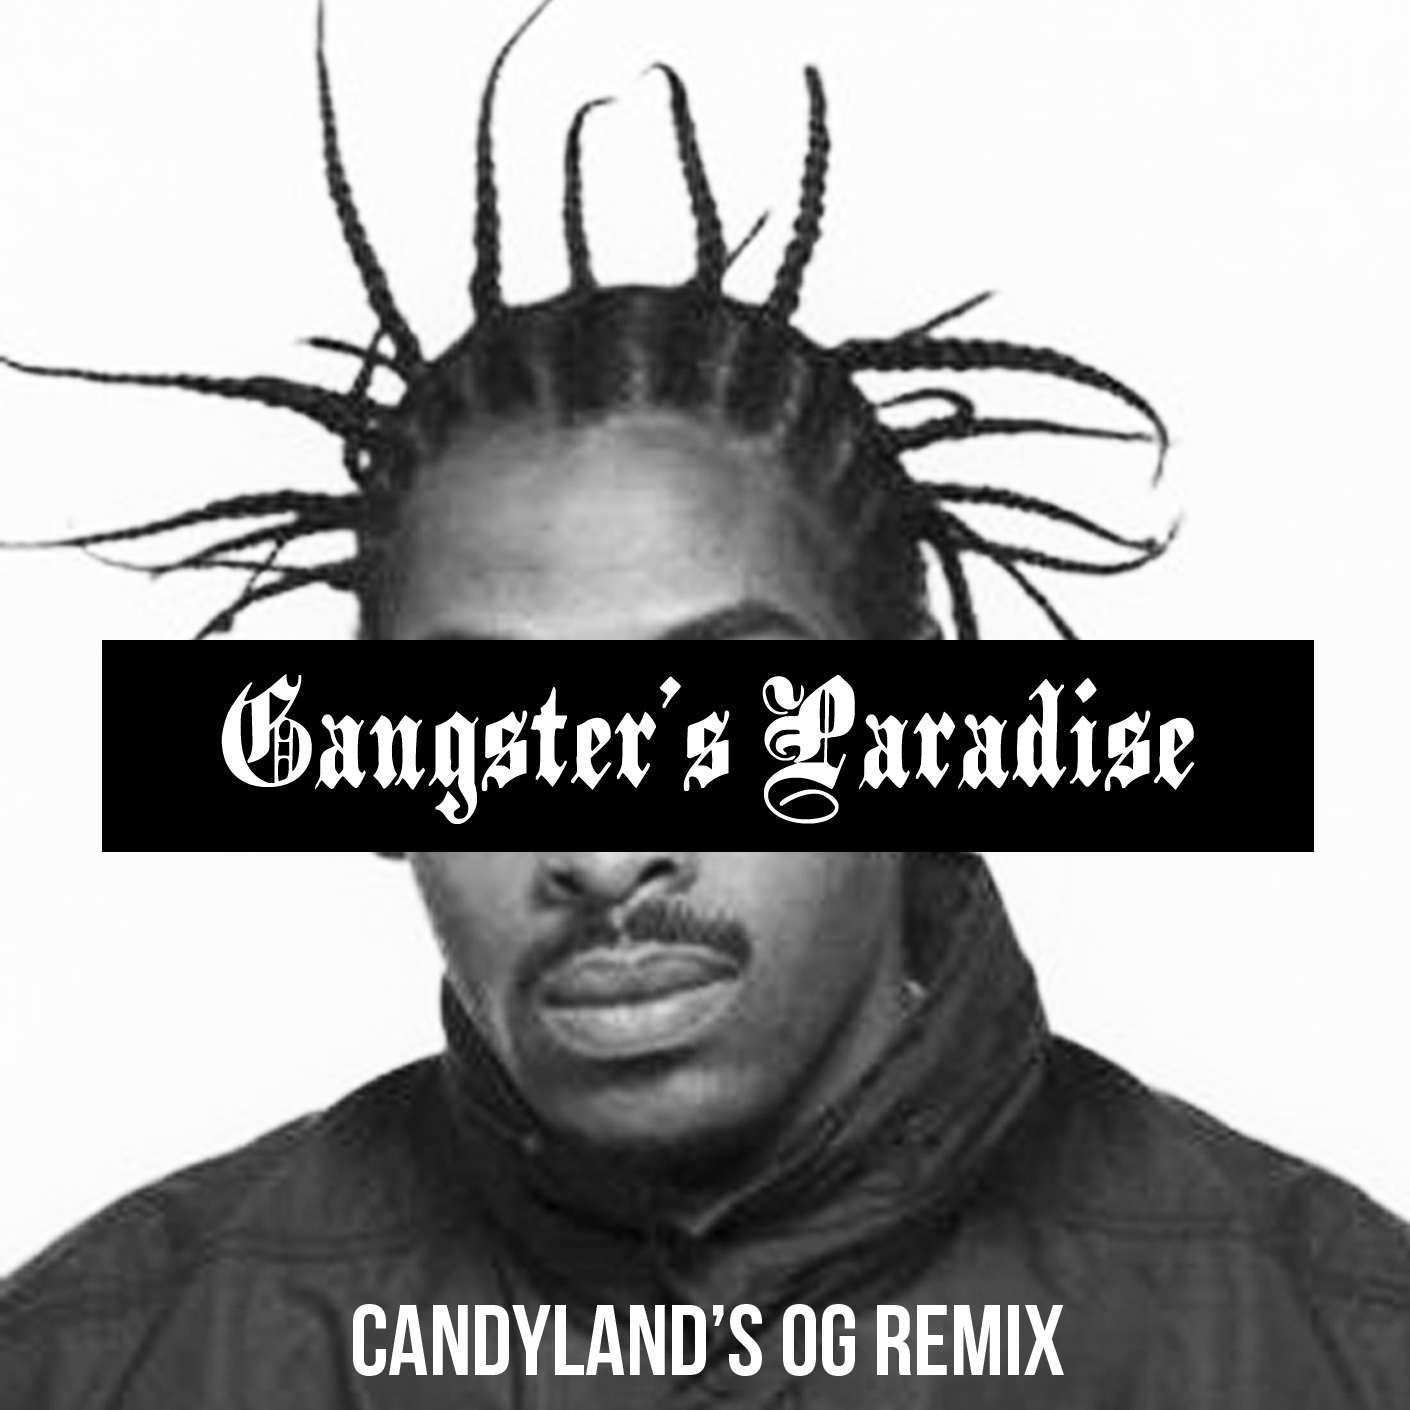 coolio gangsta paradise release year